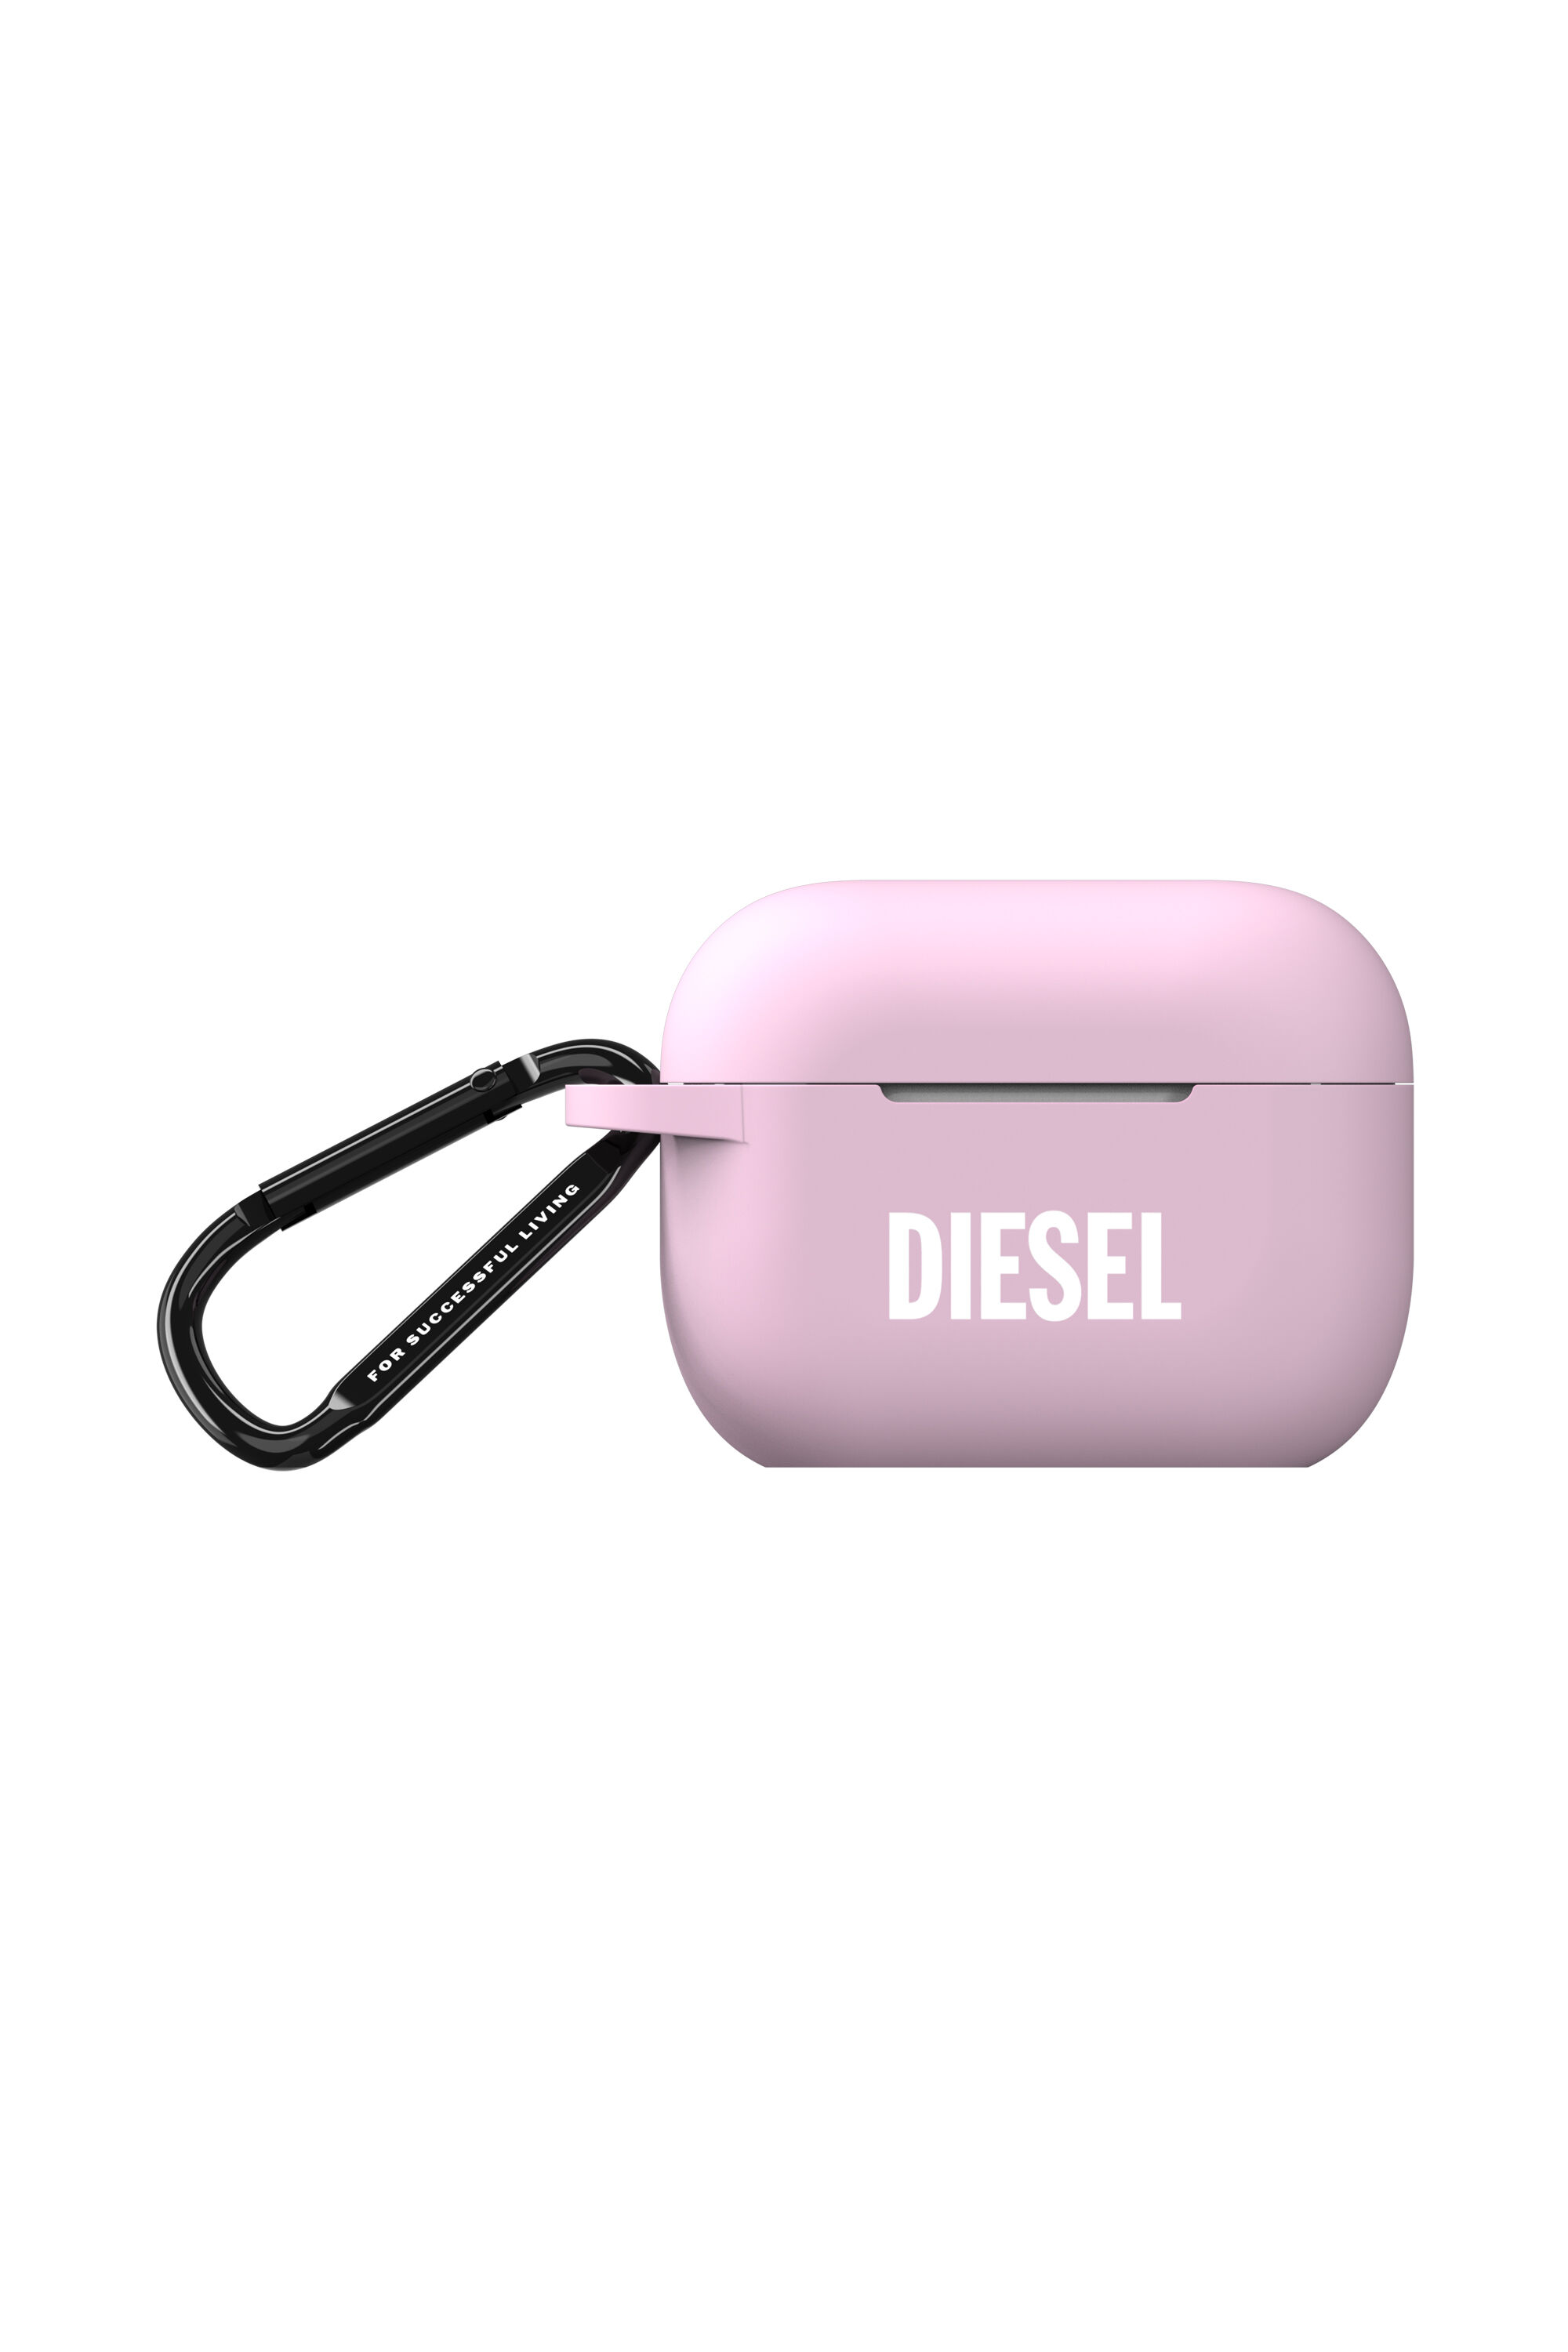 Diesel - 49862 AIRPOD CASE, Unisex Airpodcase silicone for AirPods pro in Pink - Image 1